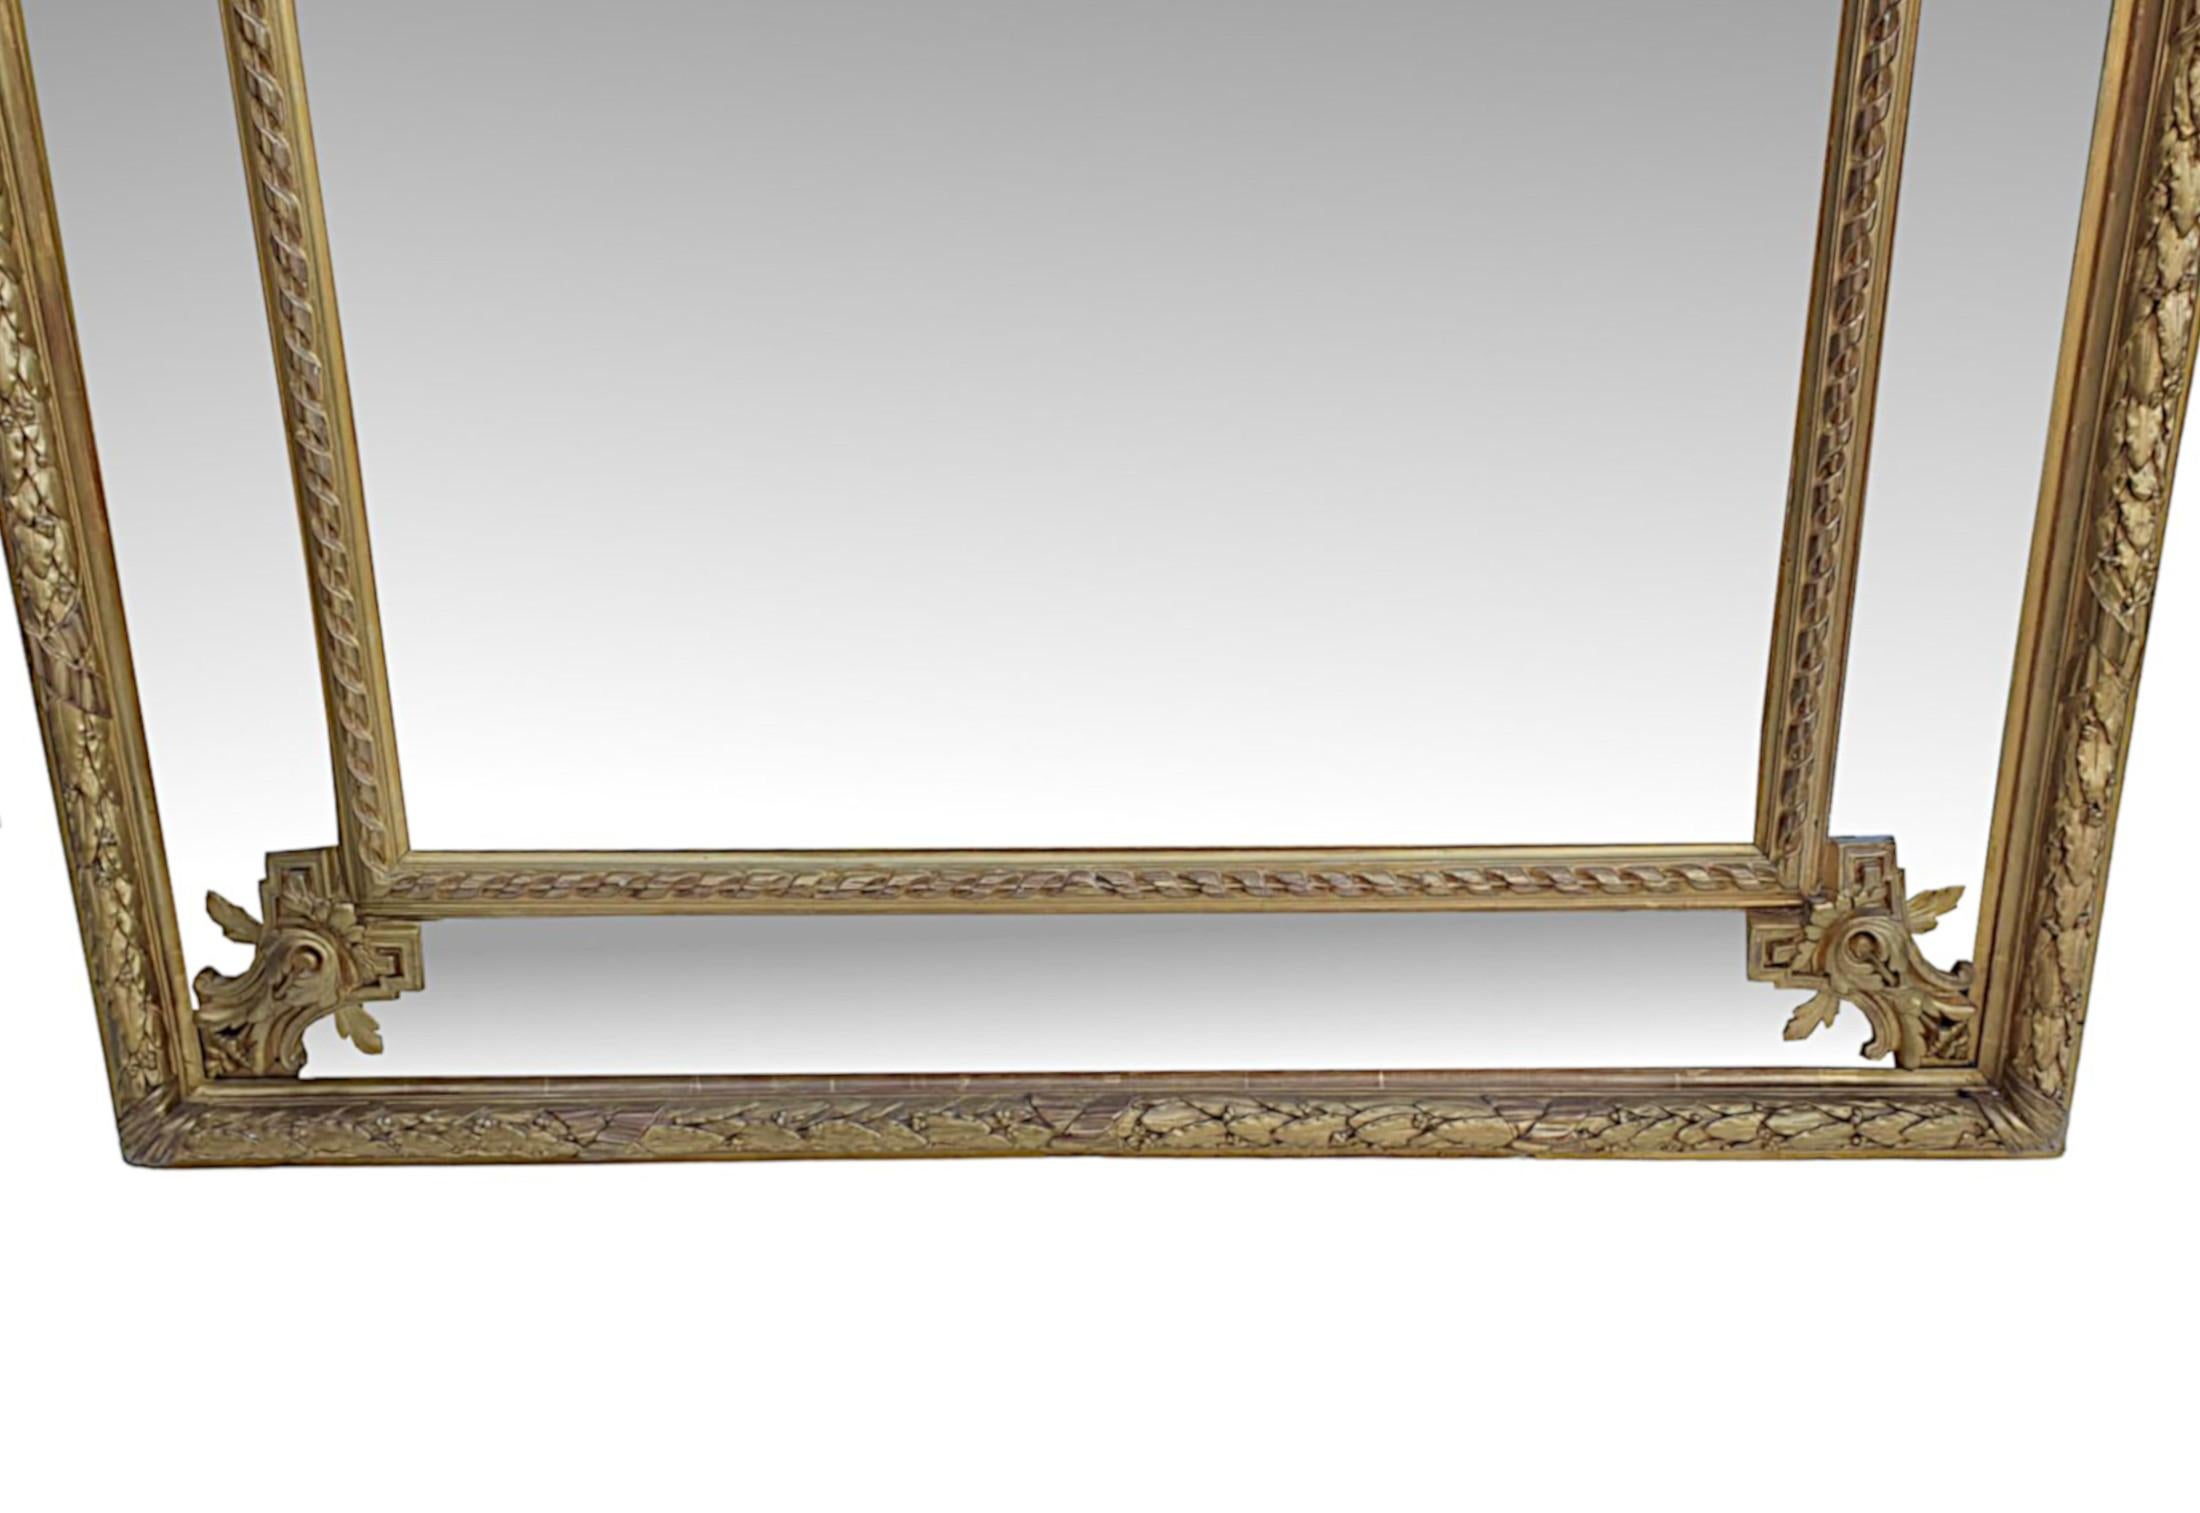 Glass Superb 19th Century Giltwood Margin Overmantle or Hall Mirror For Sale